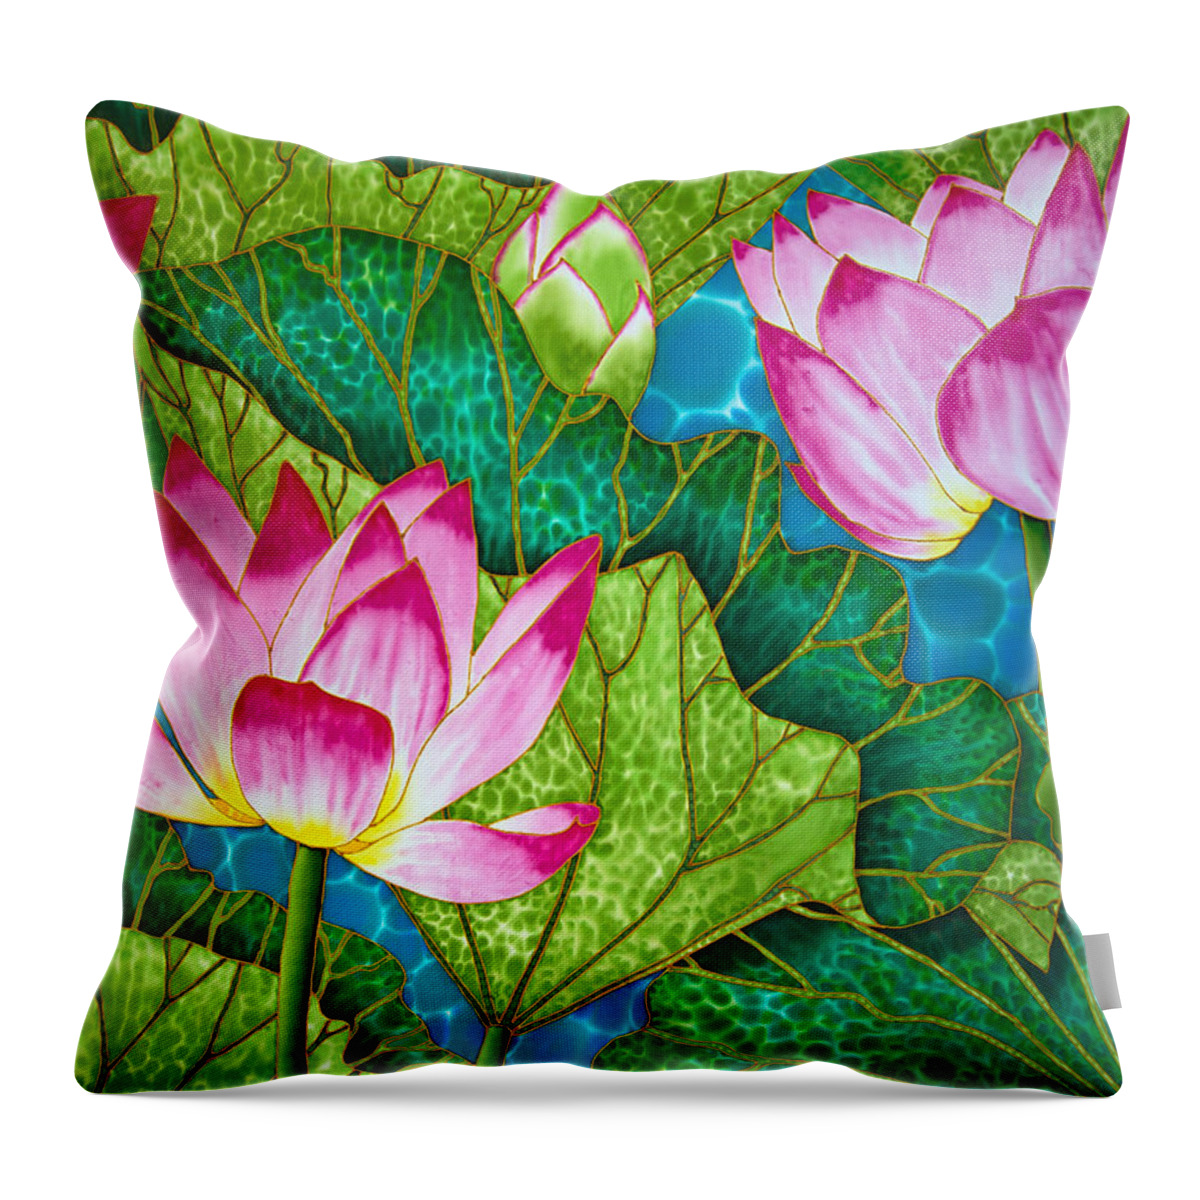 Waterlily Throw Pillow featuring the painting Lotus Pond by Daniel Jean-Baptiste